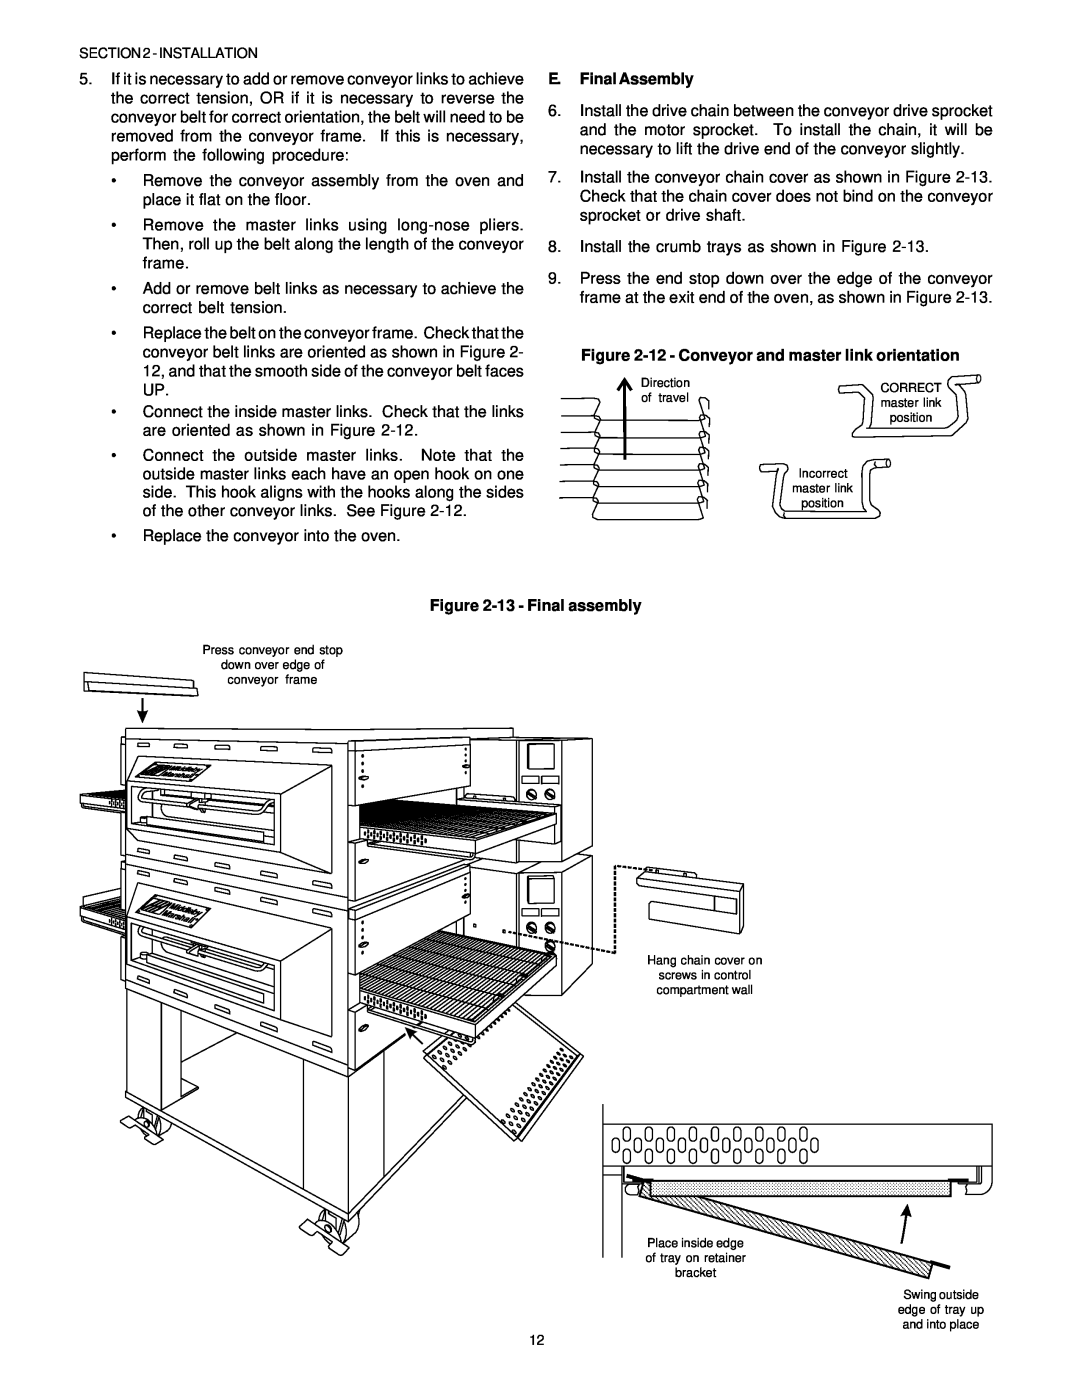 Middleby Marshall PS536GS manual English, E.Final Assembly, 12- Conveyor and master link orientation, 13- Final assembly 